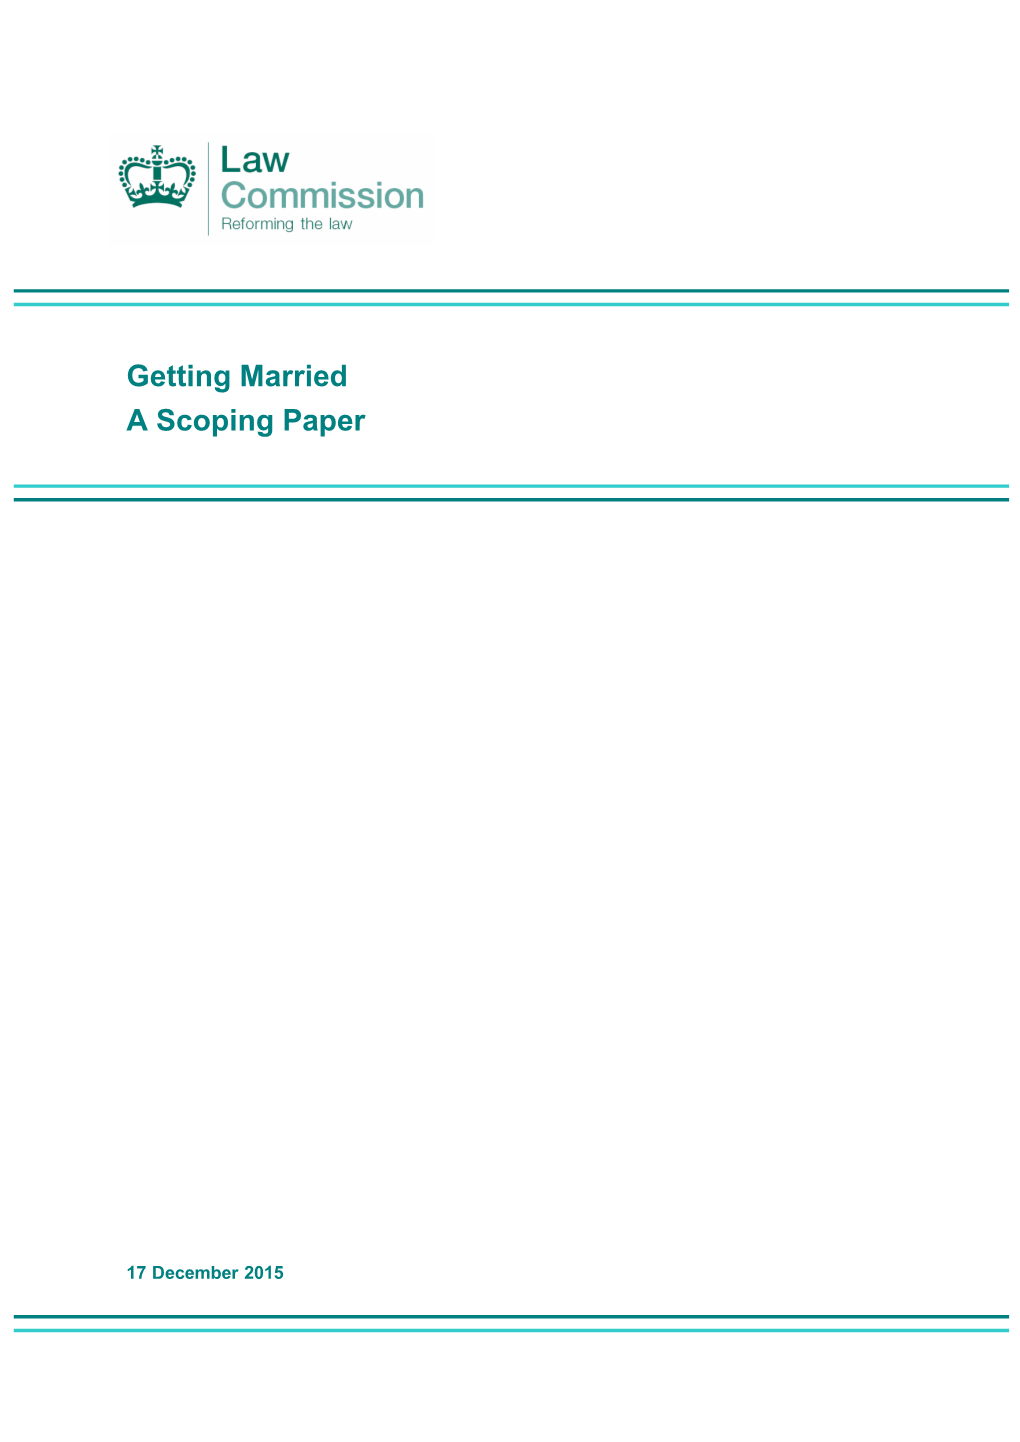 Getting Married a Scoping Paper